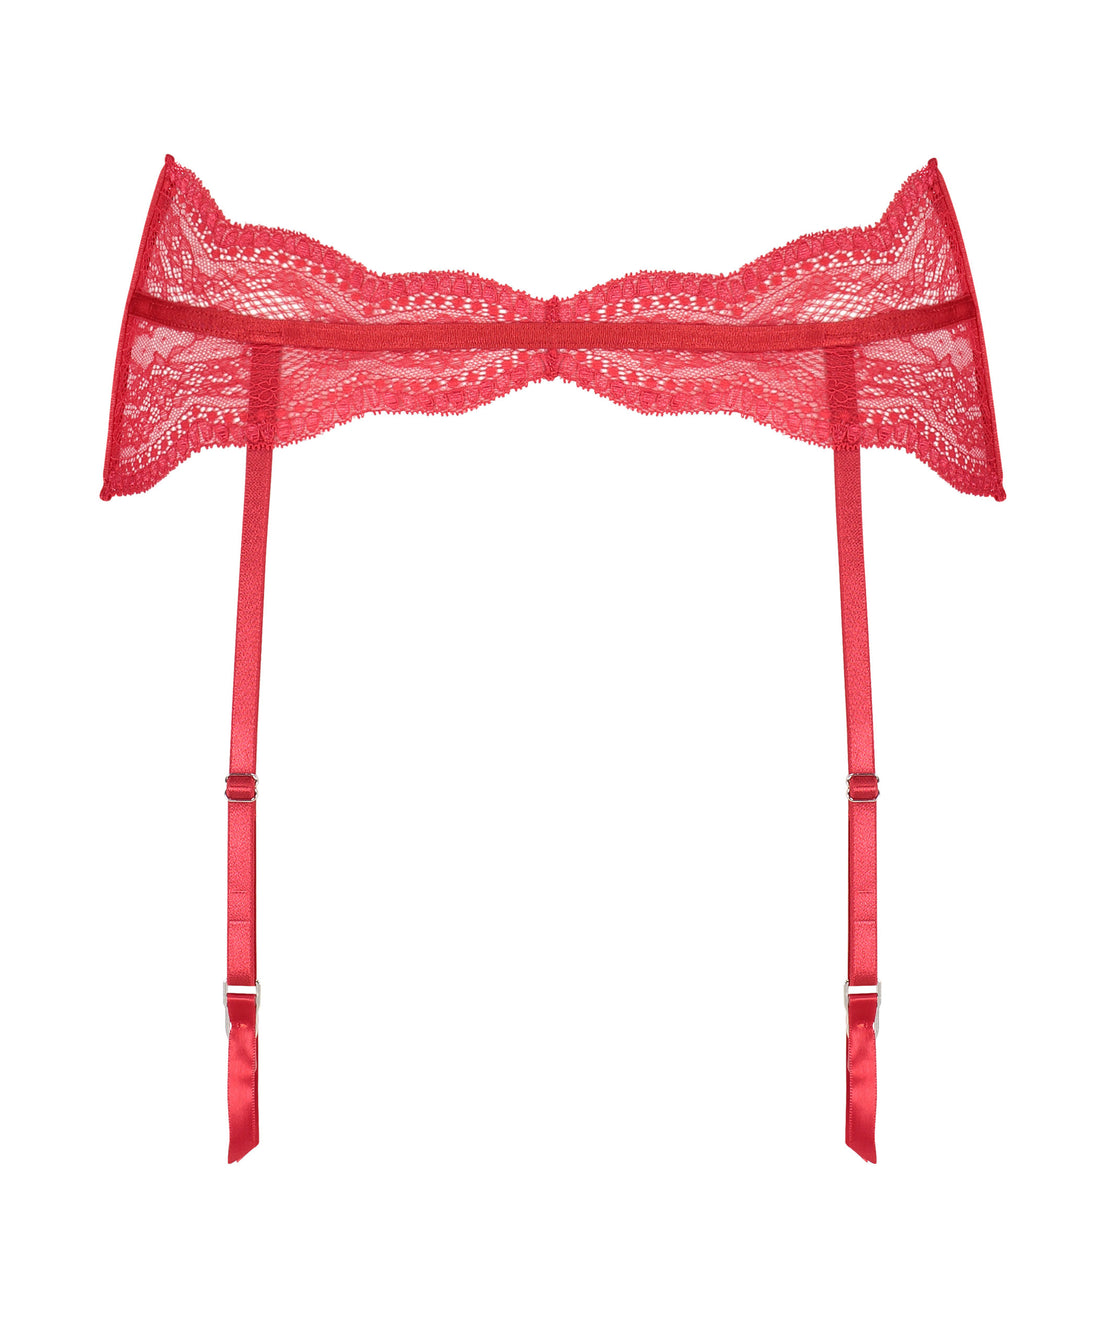 Red Lace Garter Belt_184806_Tango Red_01